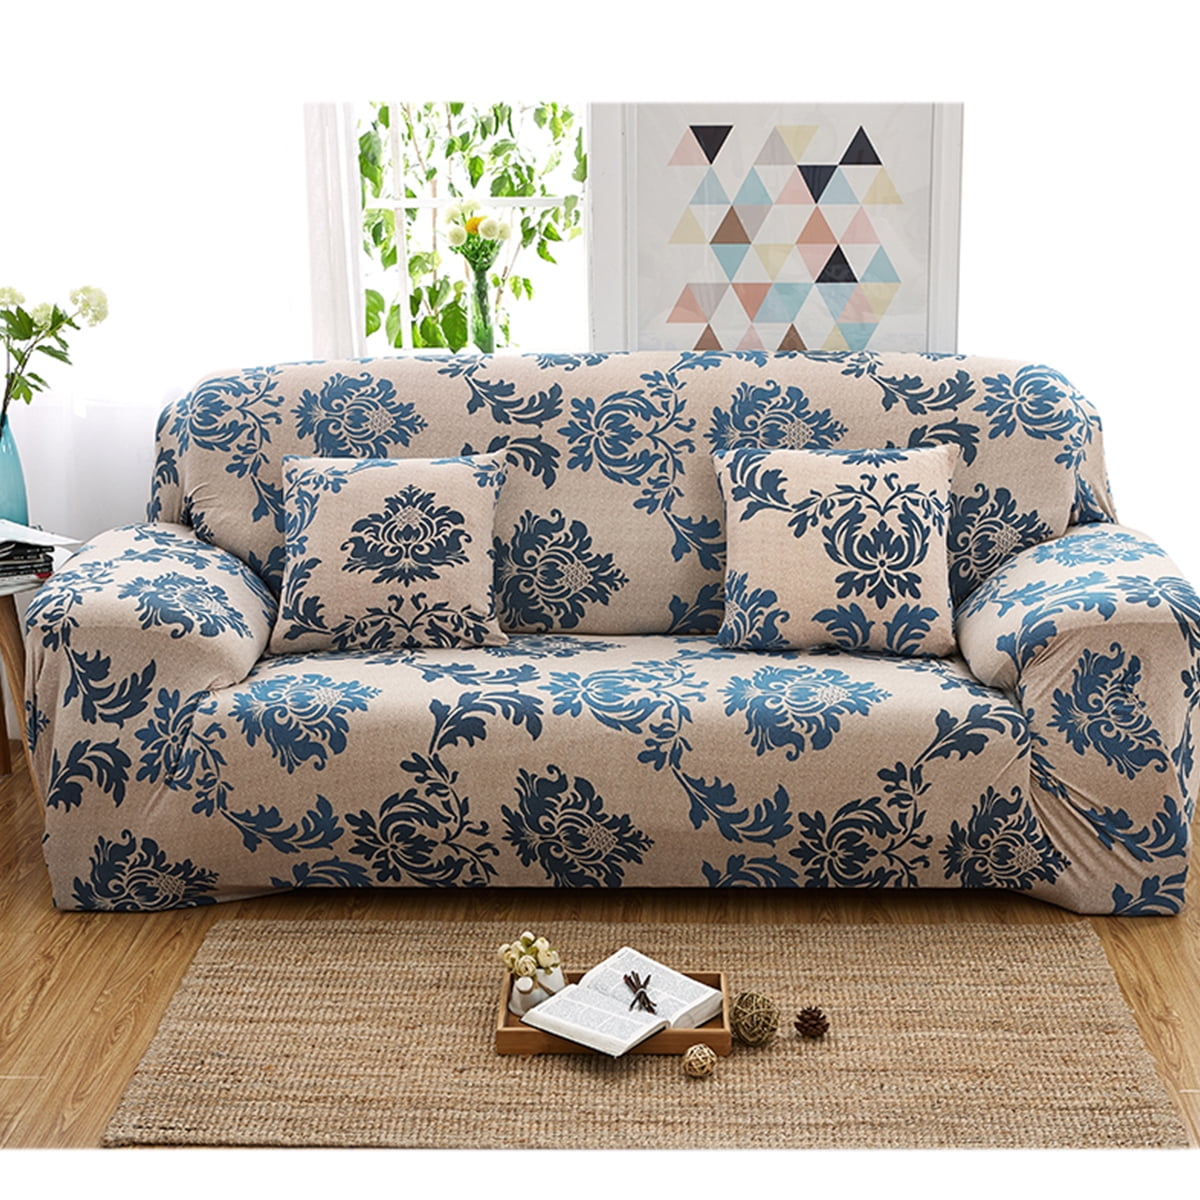 Details about   Four Season Non-Slip Sofa Cover Slipcover Washable Elastic Printed All-inclusive 